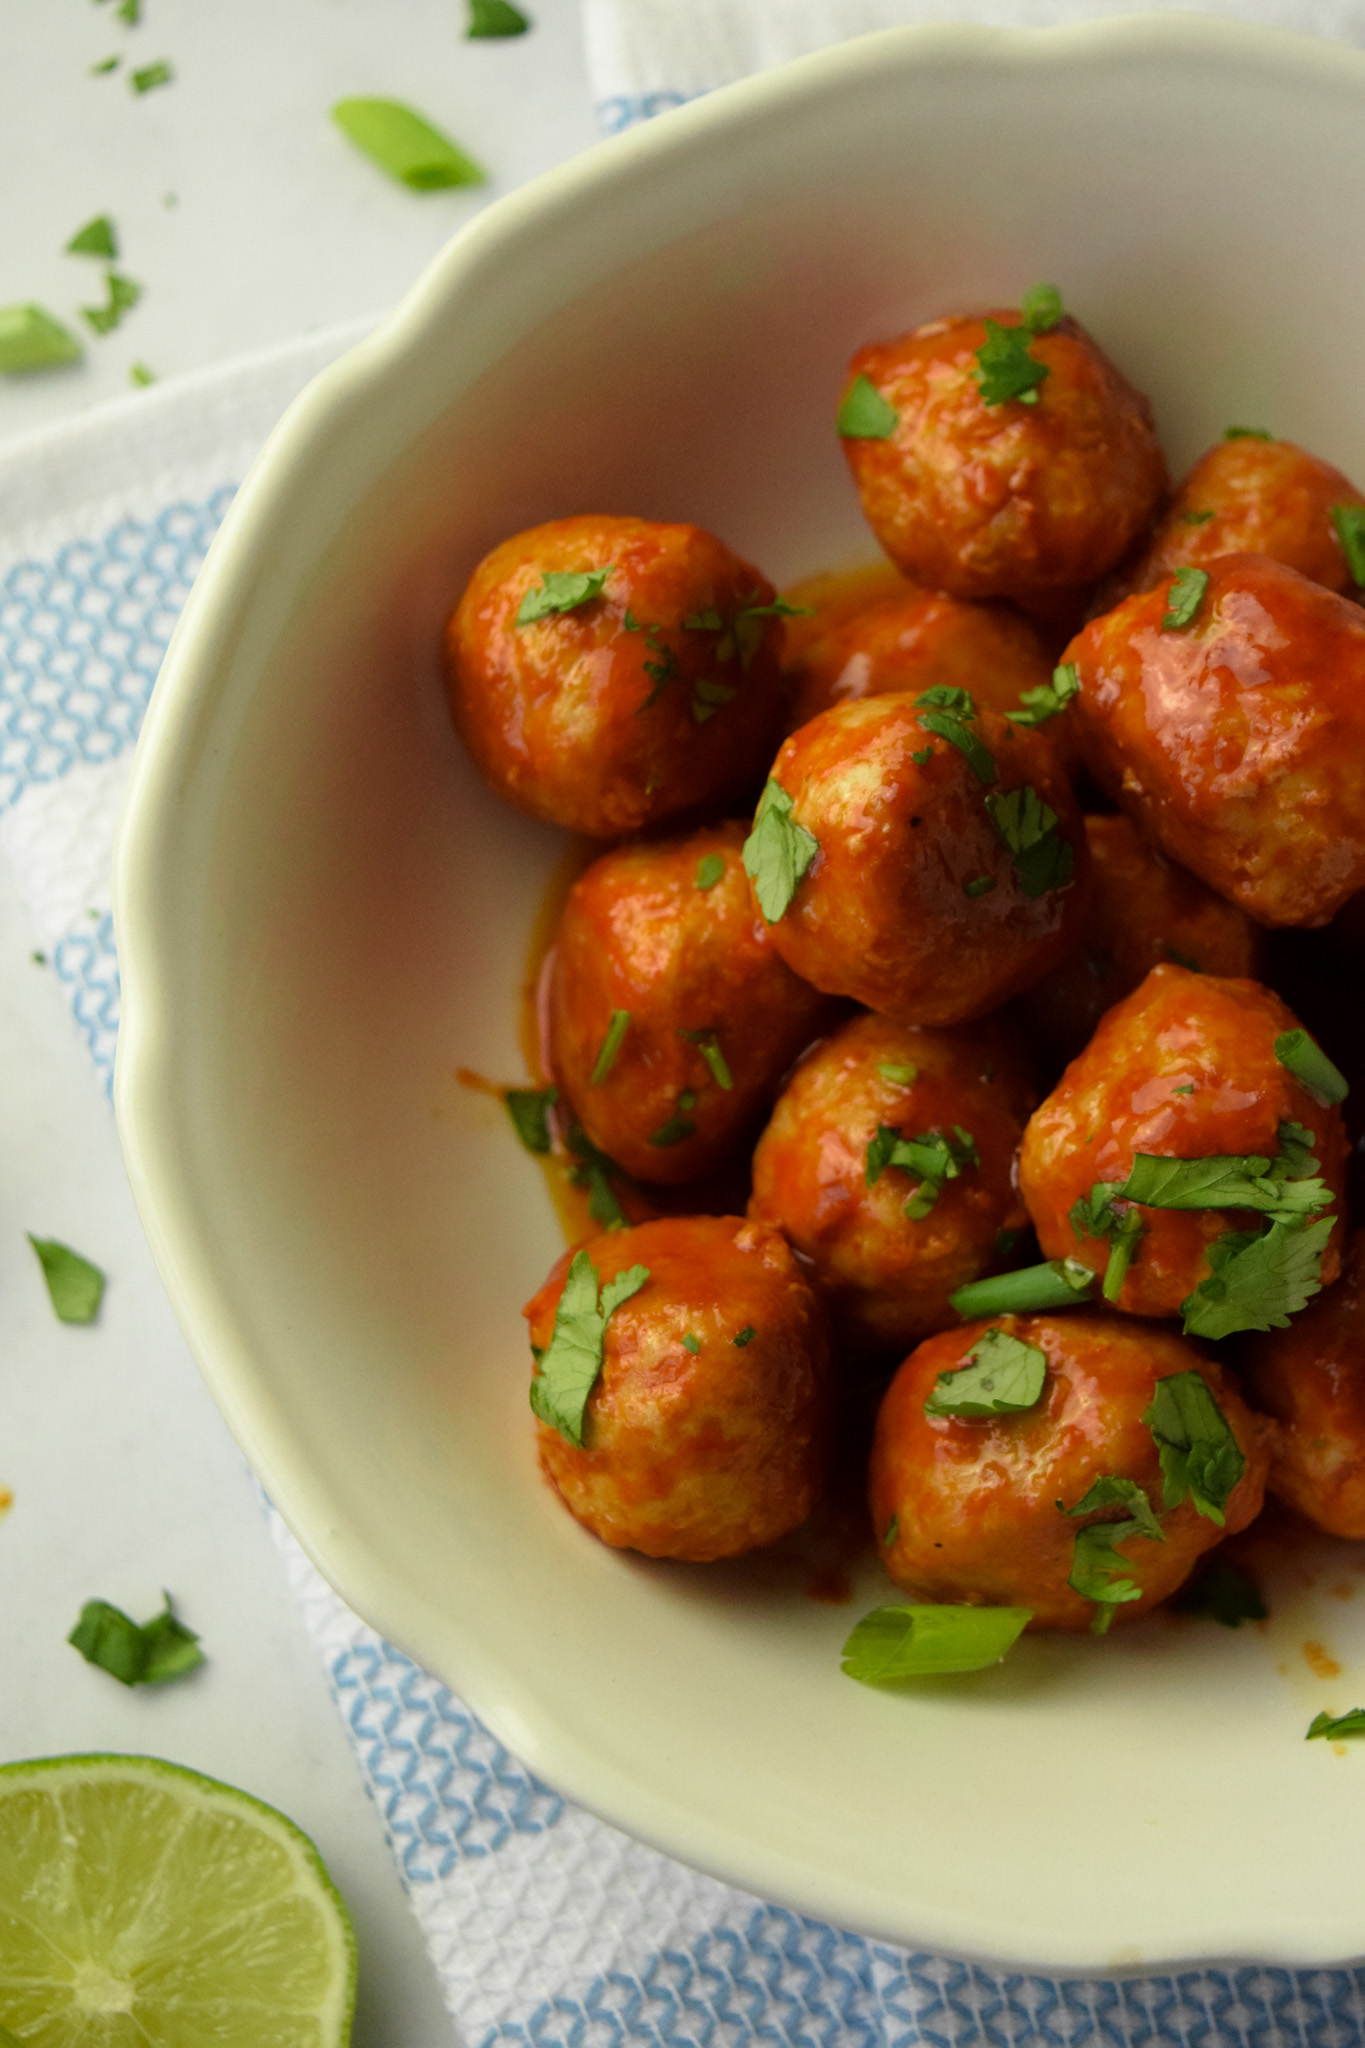 Buffalo chicken meatballs in a white bowl garnished with cilantro